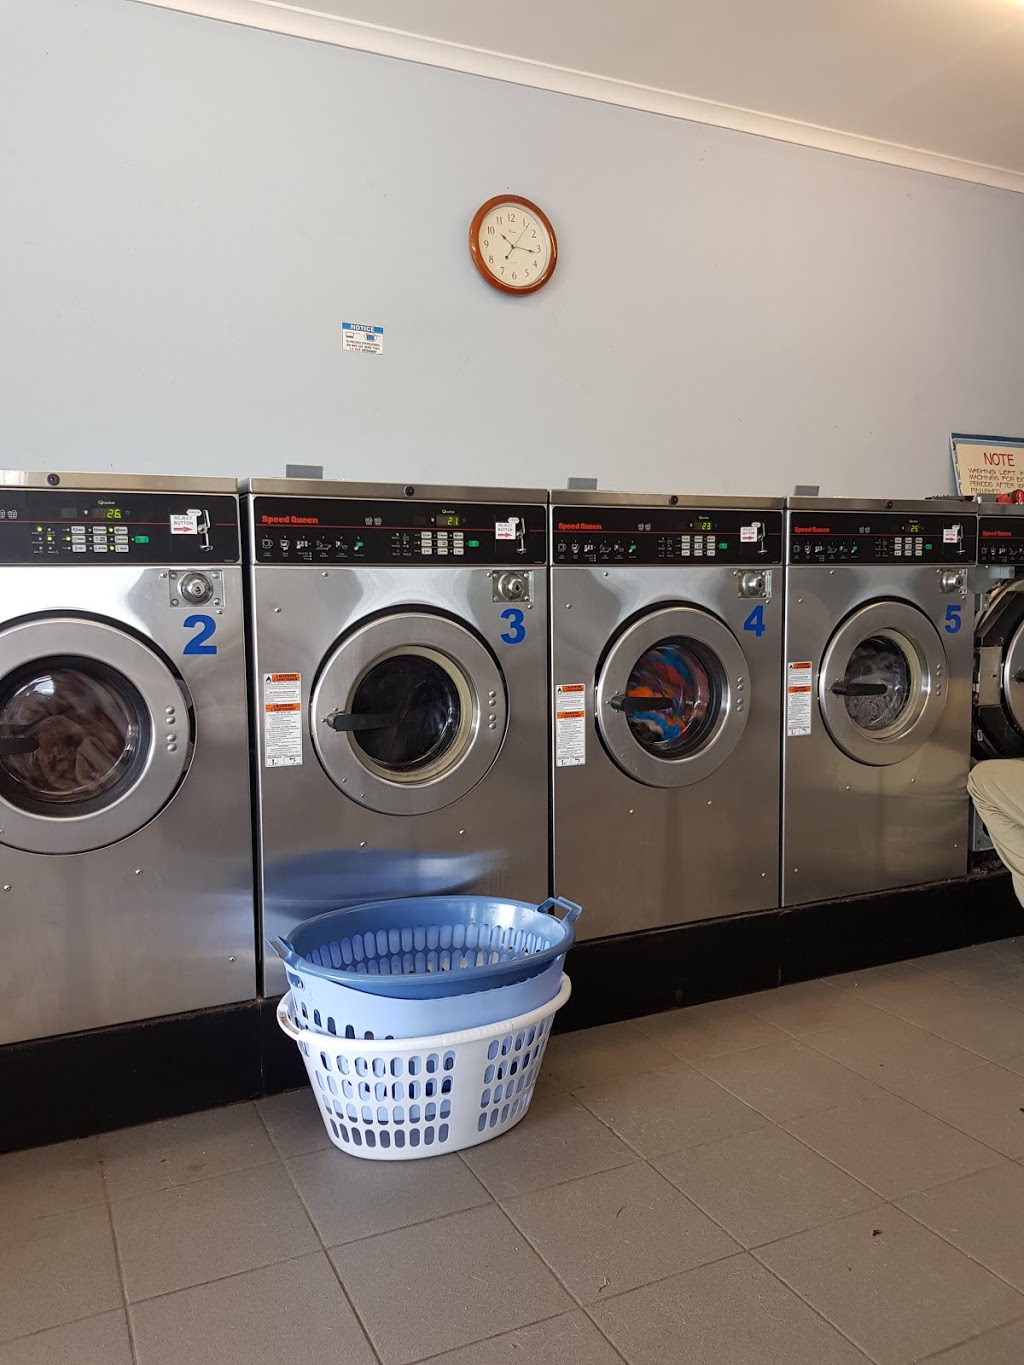 Gympie Laundromat River Road | laundry | 107 River Rd, Gympie QLD 4570, Australia | 0417731470 OR +61 417 731 470